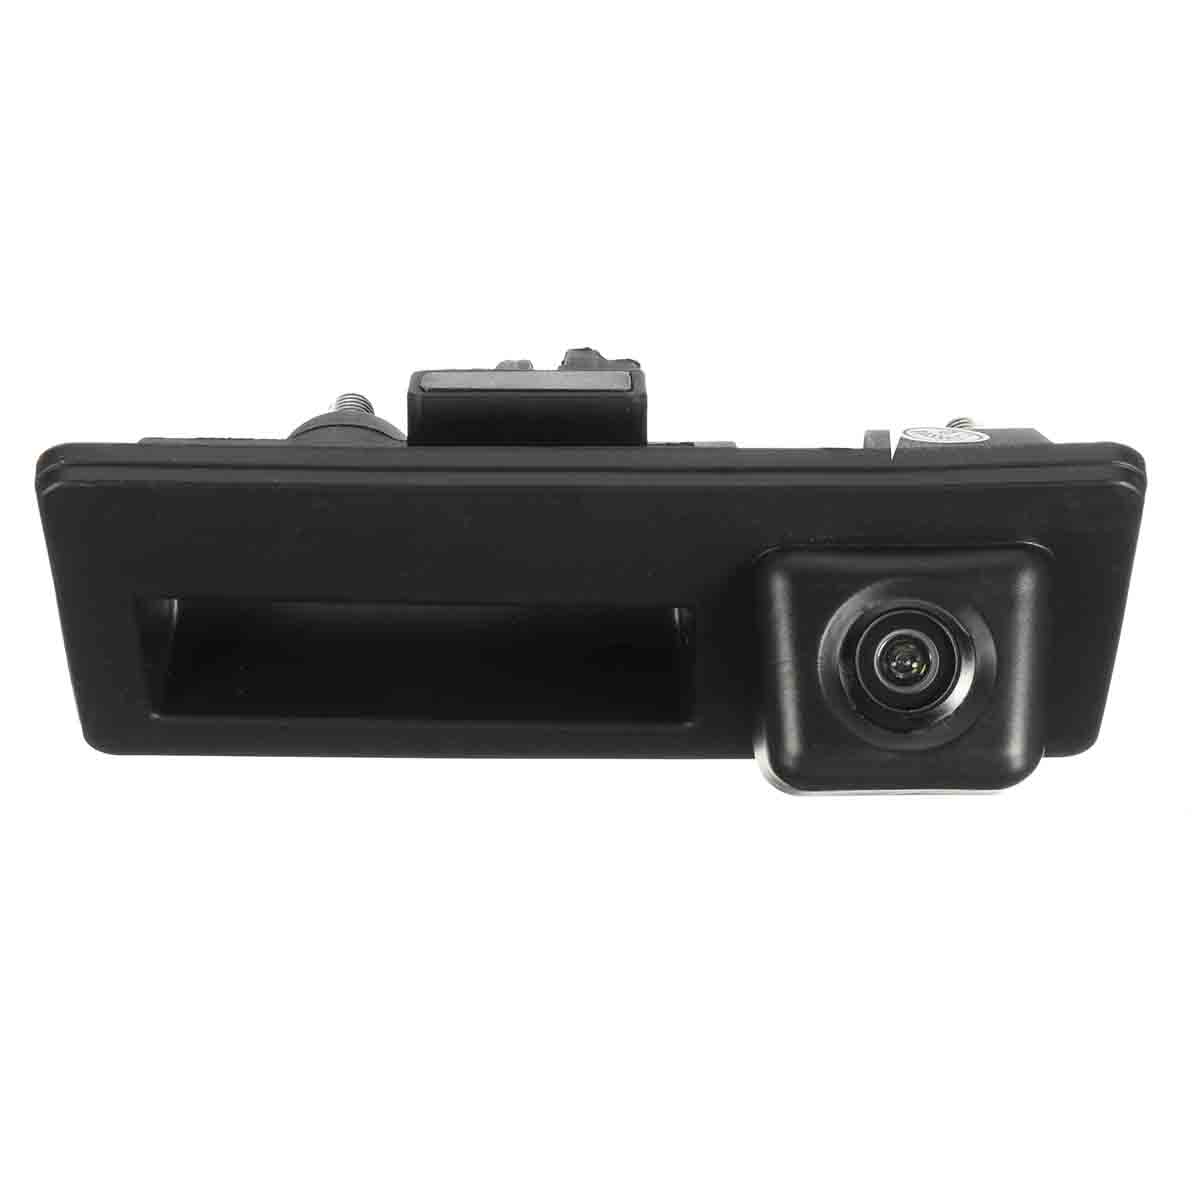 Car-Trunk-Handle-CCD-Rear-View-Backup-Parking-Camera-For-Audi-1159325